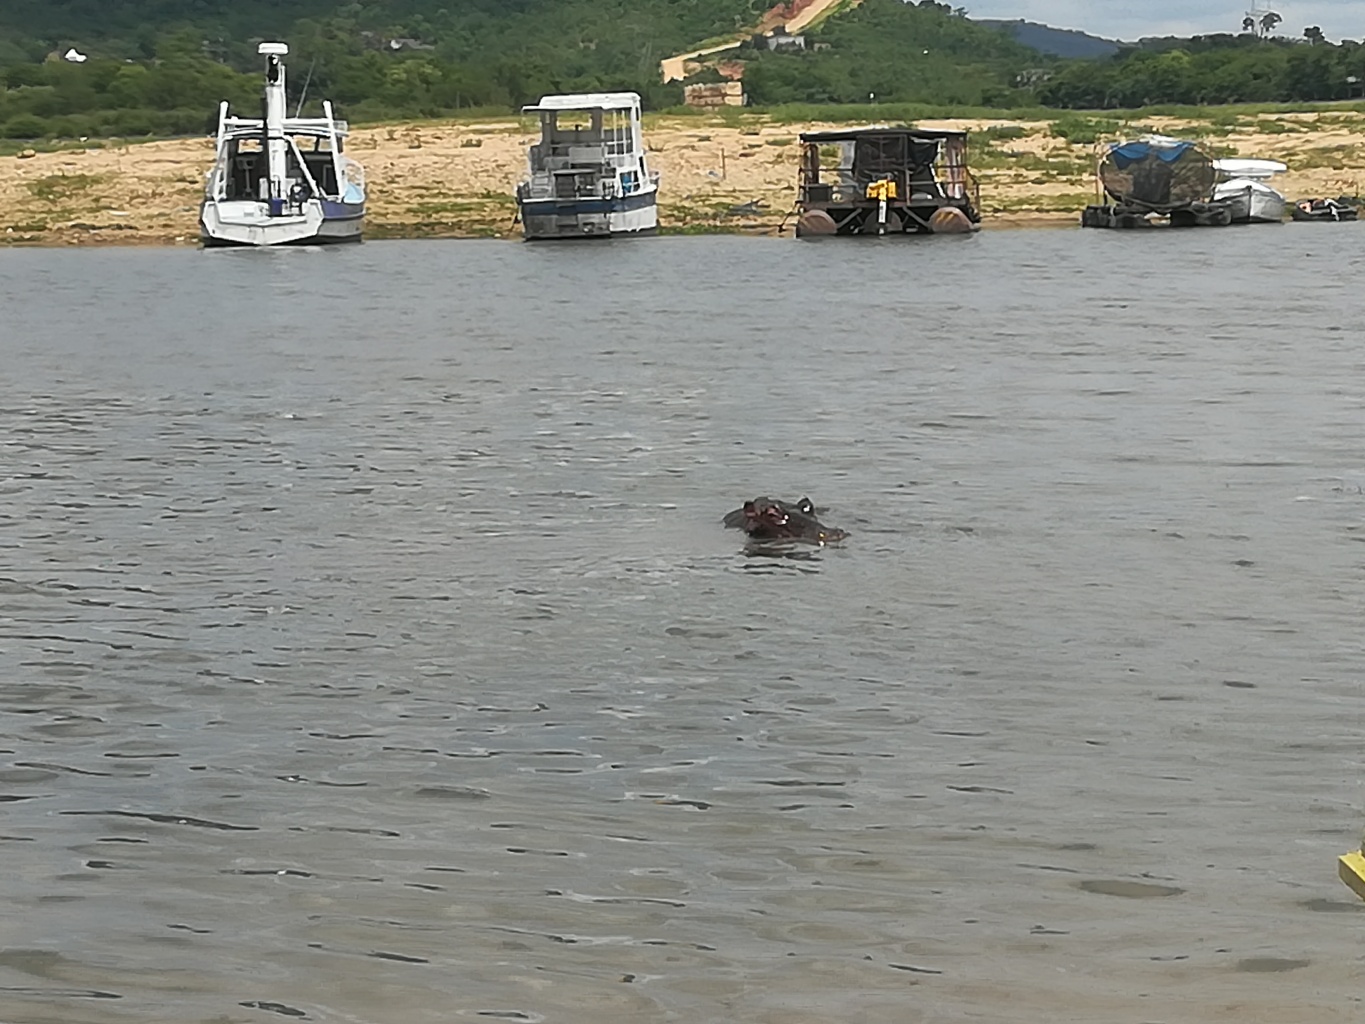 Pic_7_of_Hippo_partially_submerged_in_water_near_fishermen_boats[1].jpeg